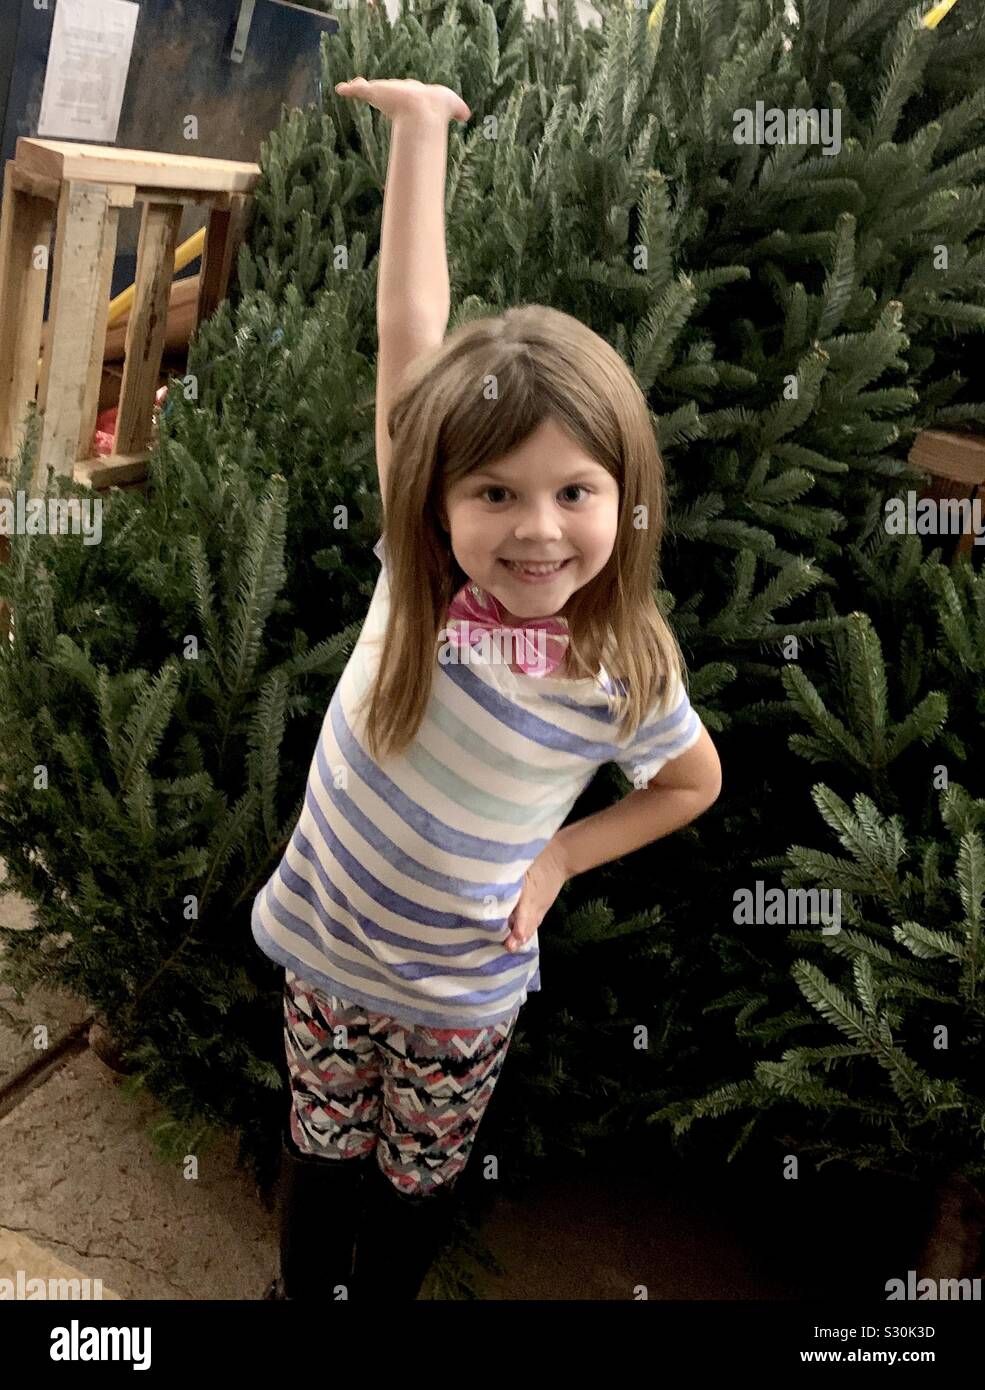 Finding the perfect family Christmas tree! Stock Photo